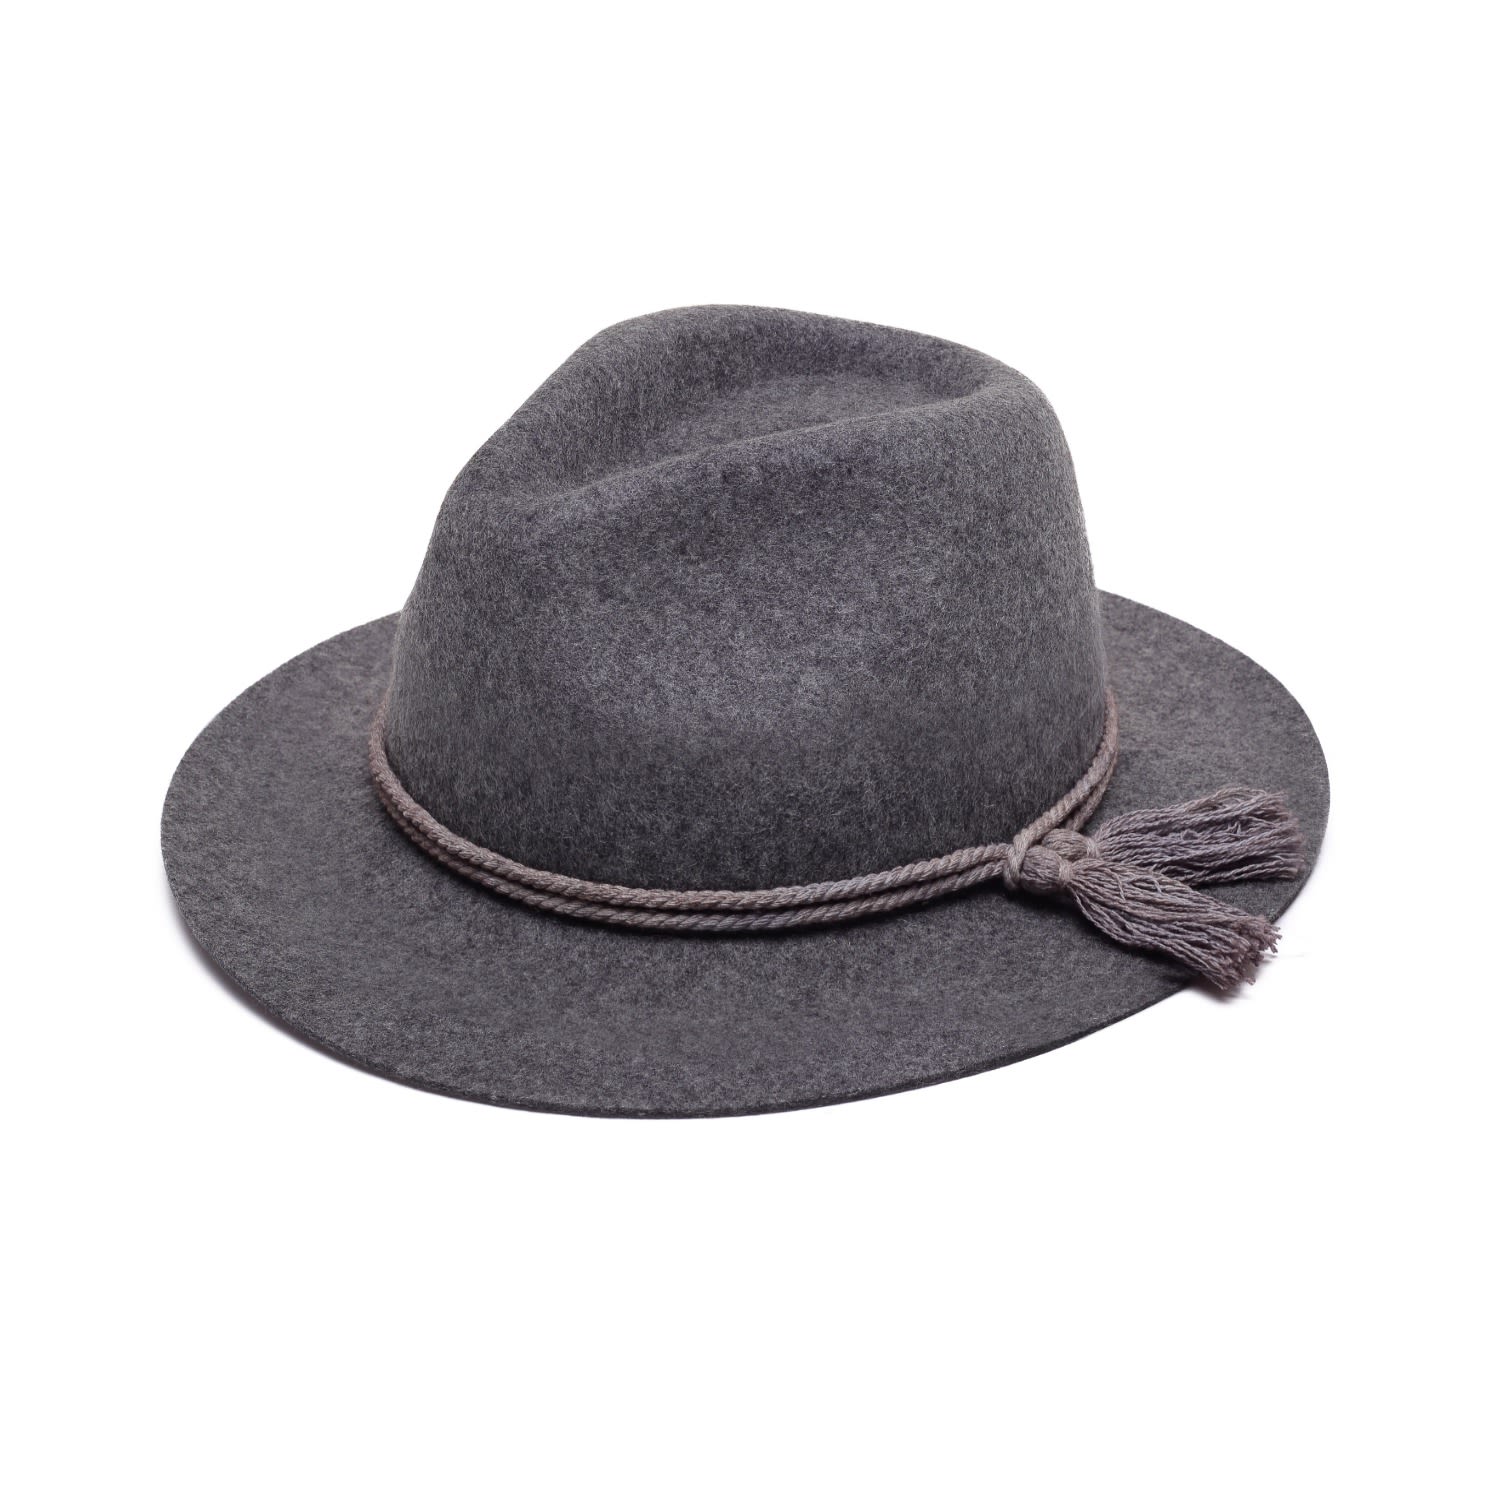 Women’s Grey Fedora Hat With Cotton Tassels Small Justine Hats